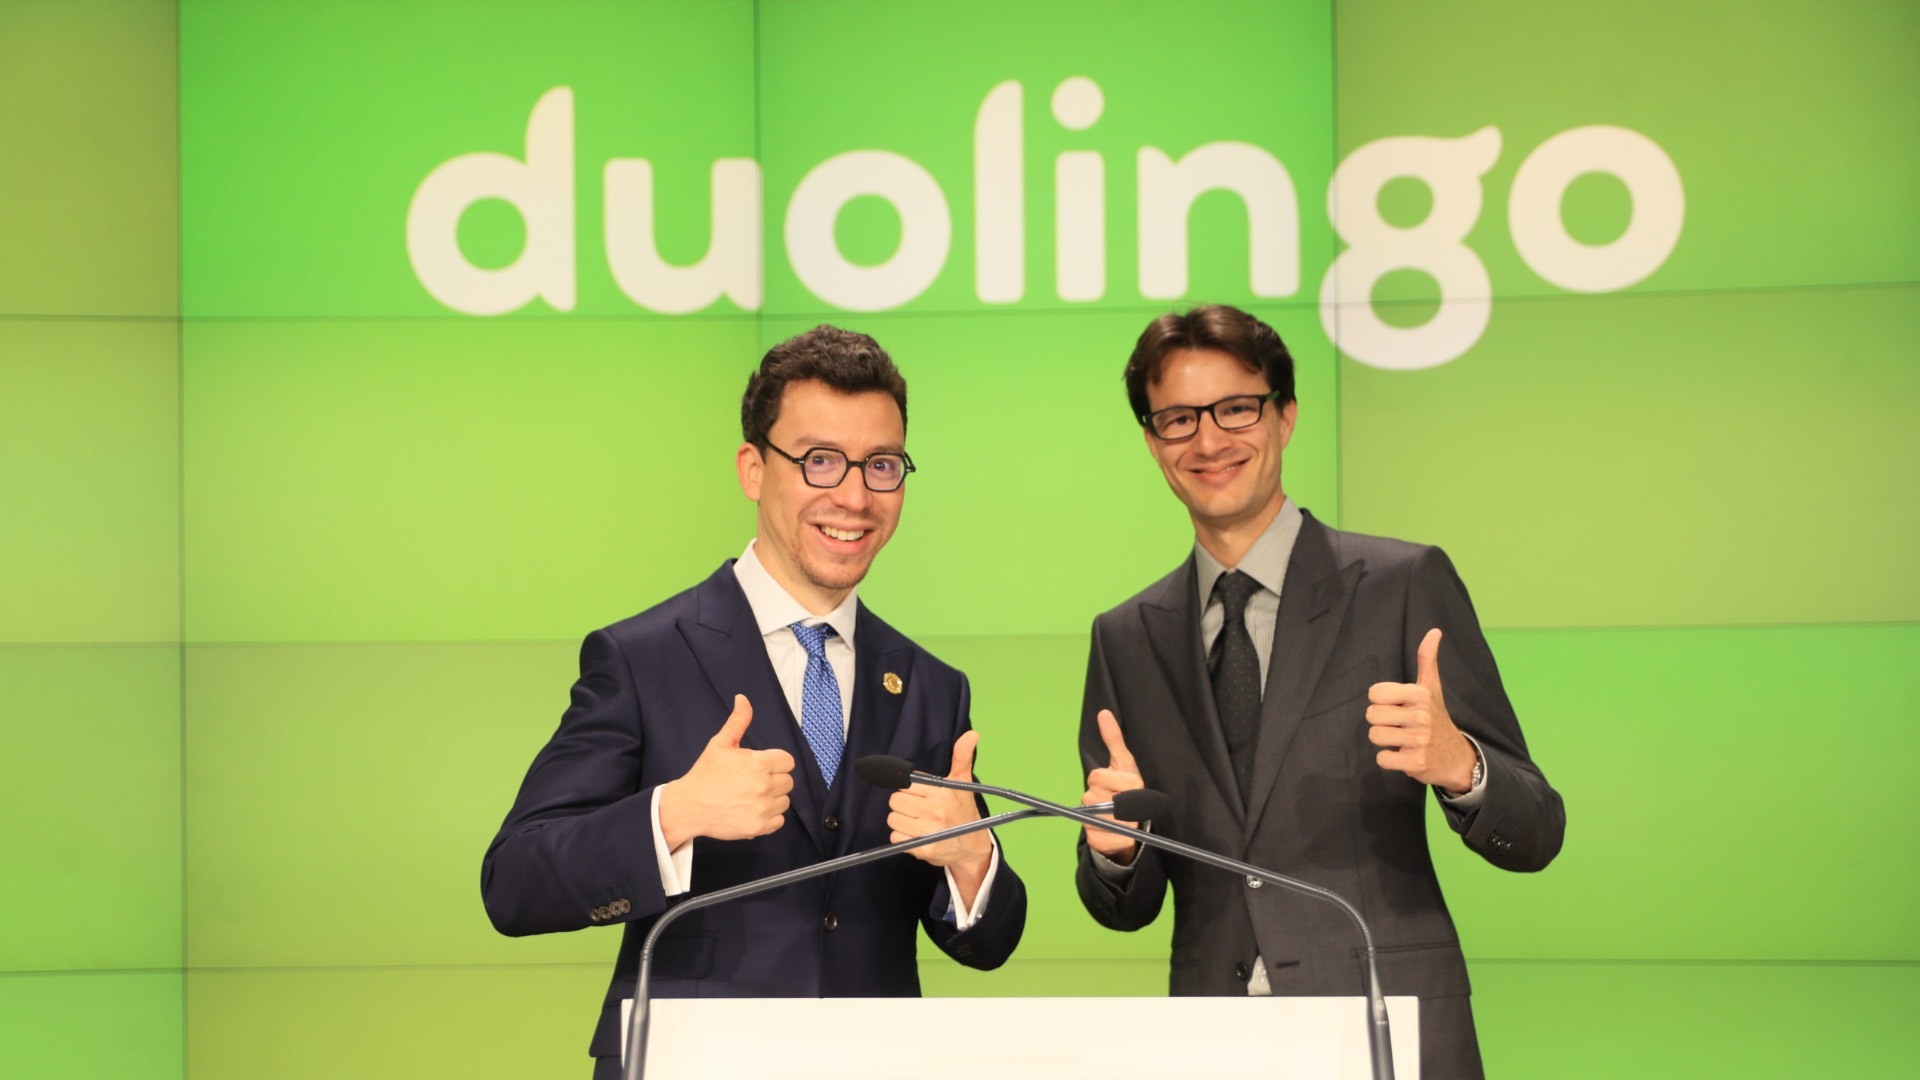 Duolingo as a renowned app developed by a part-time developer